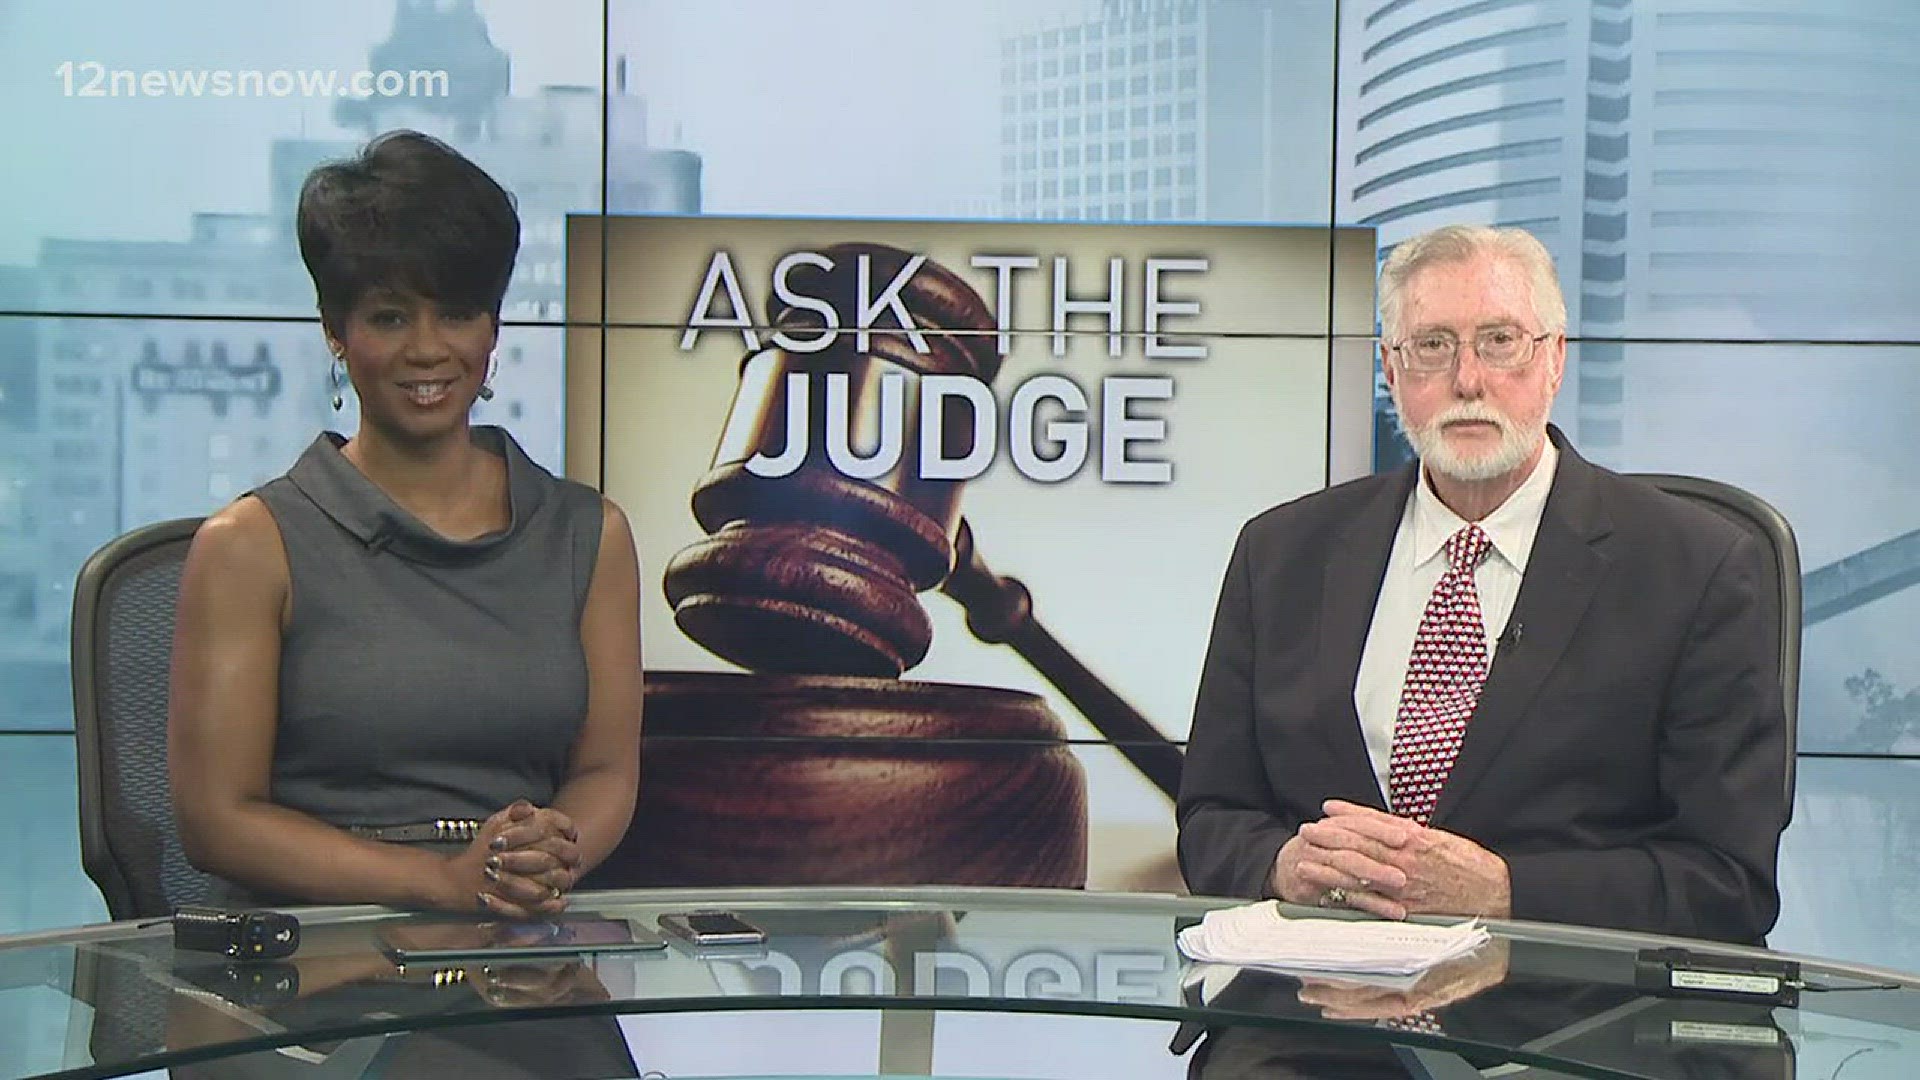 Today on Ask The Judge, the Honorable Judge Larry Thorne answers YOUR questions about employers cutting pay, discovering you bought a house with problems that the seller didn't disclose, and more.